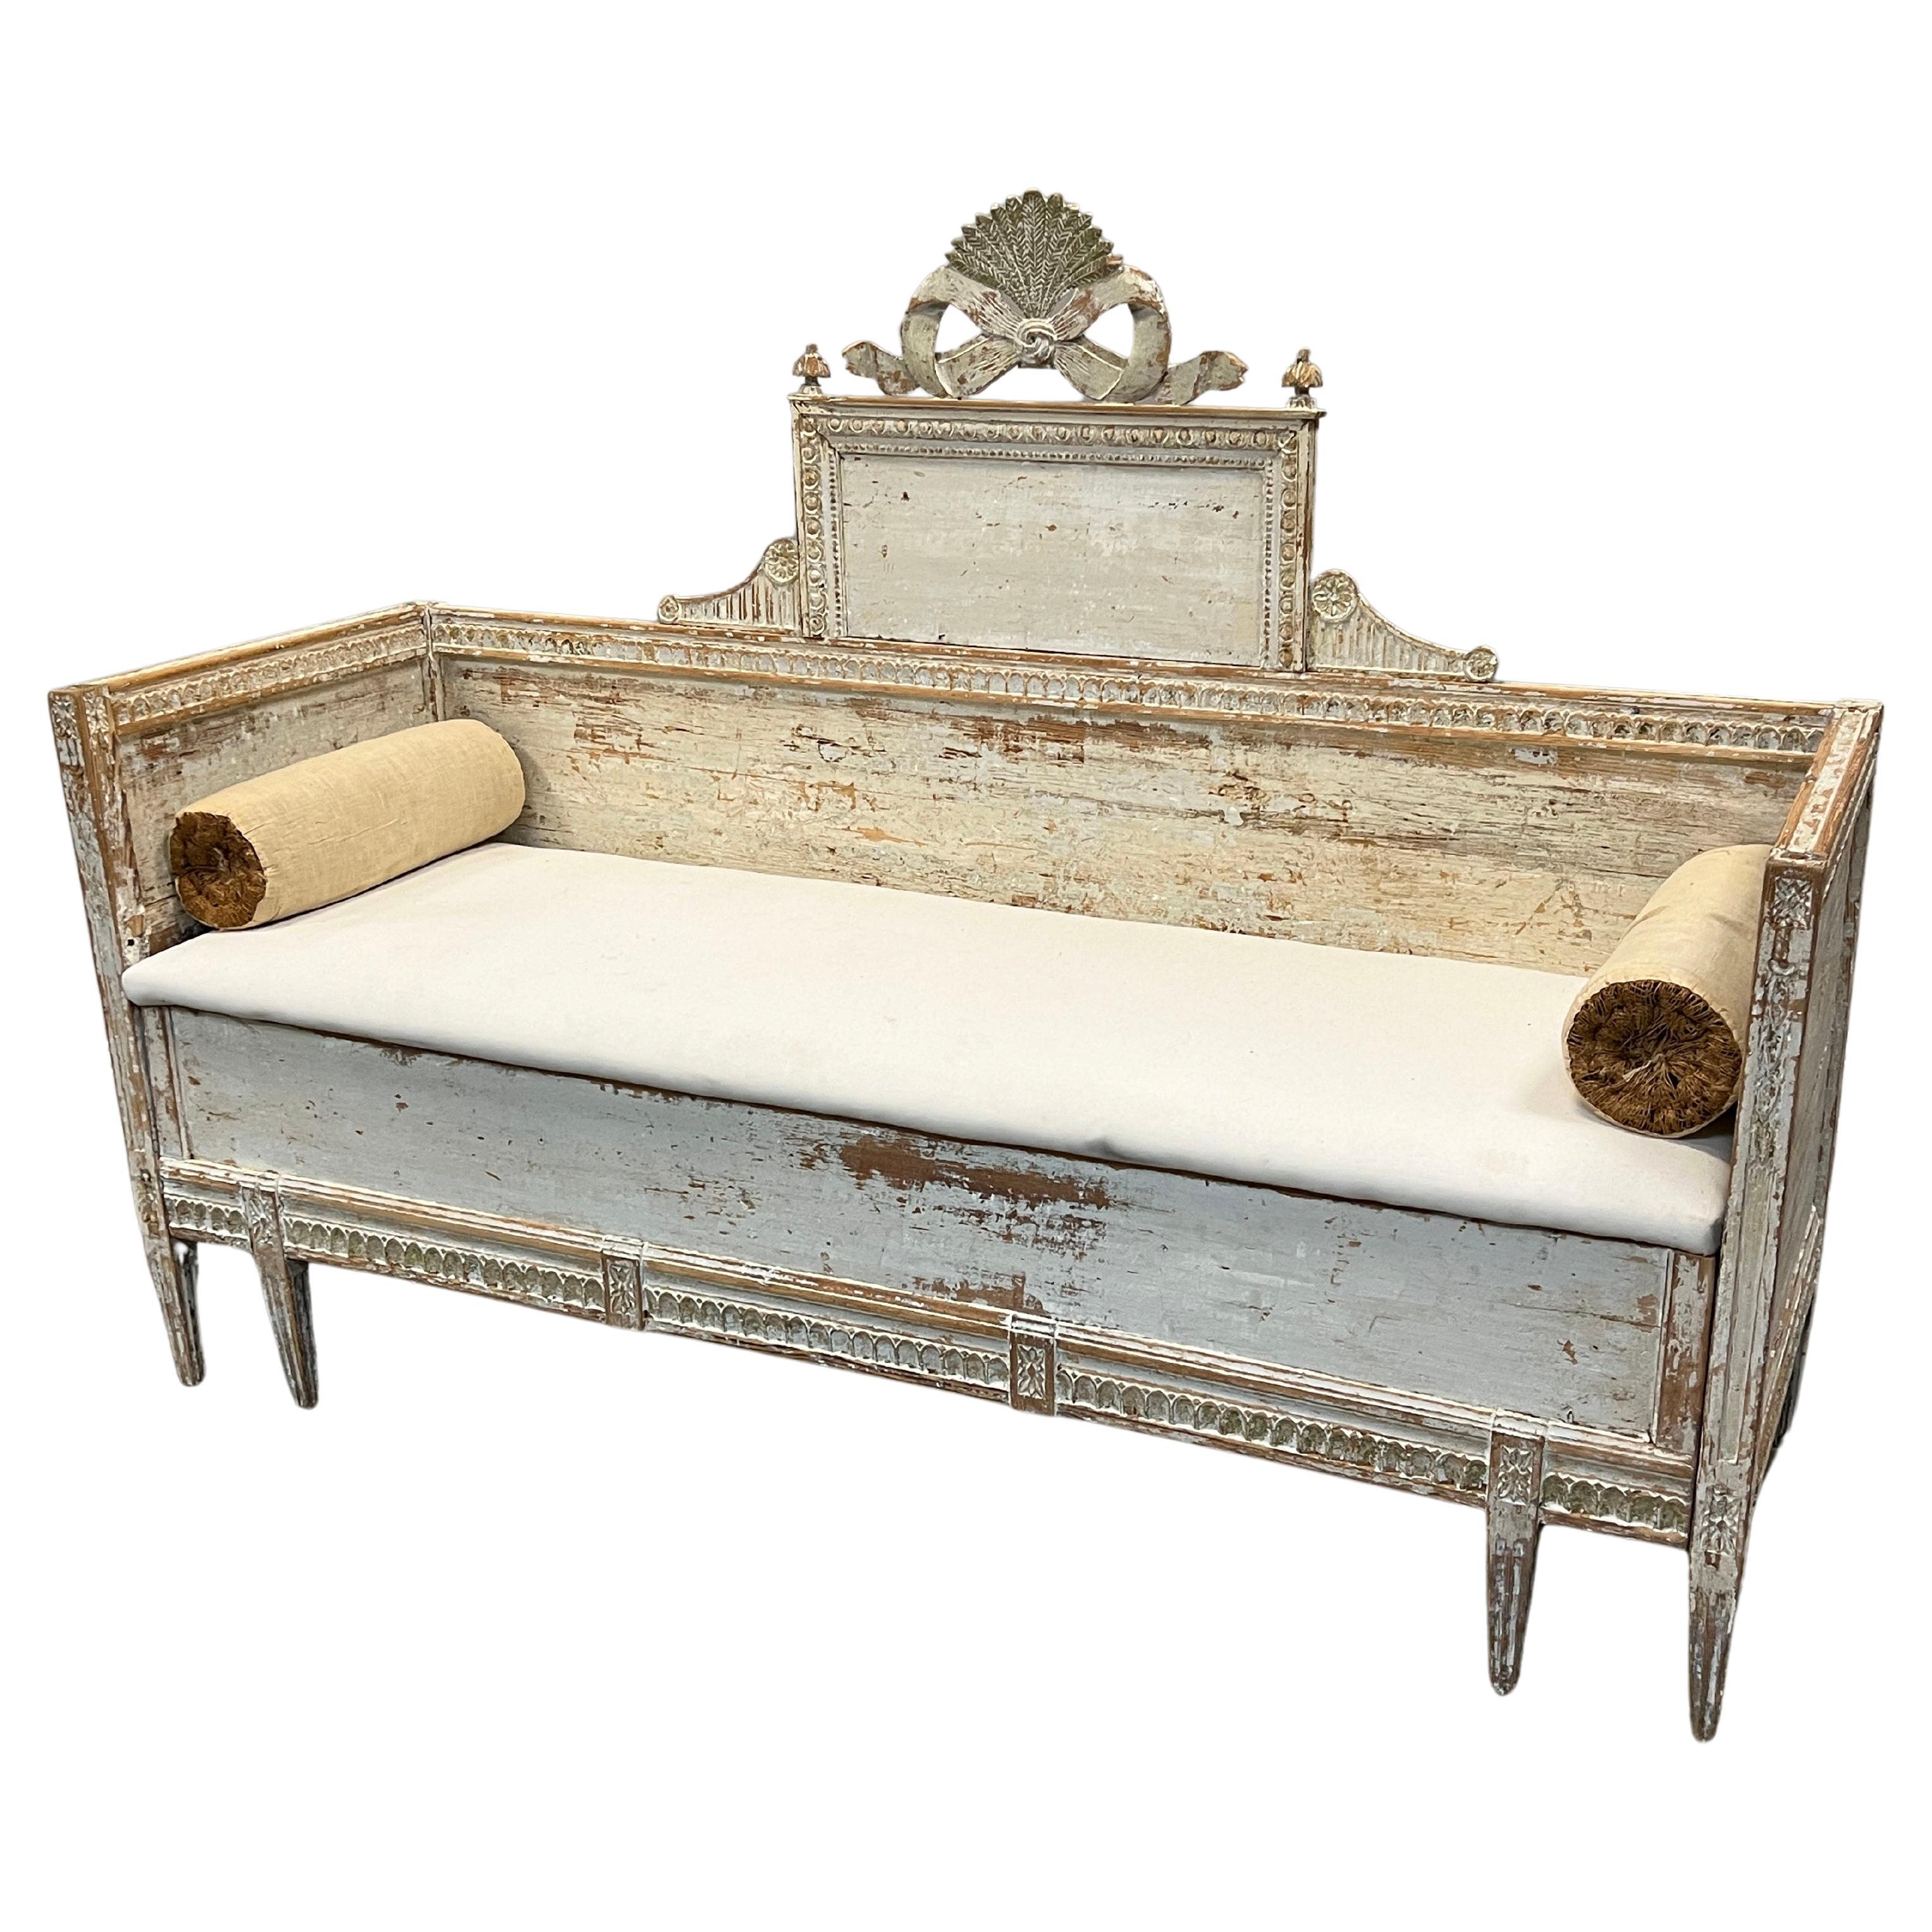 19th Century Swedish Gustavian Painted Settee With Trundle For Sale